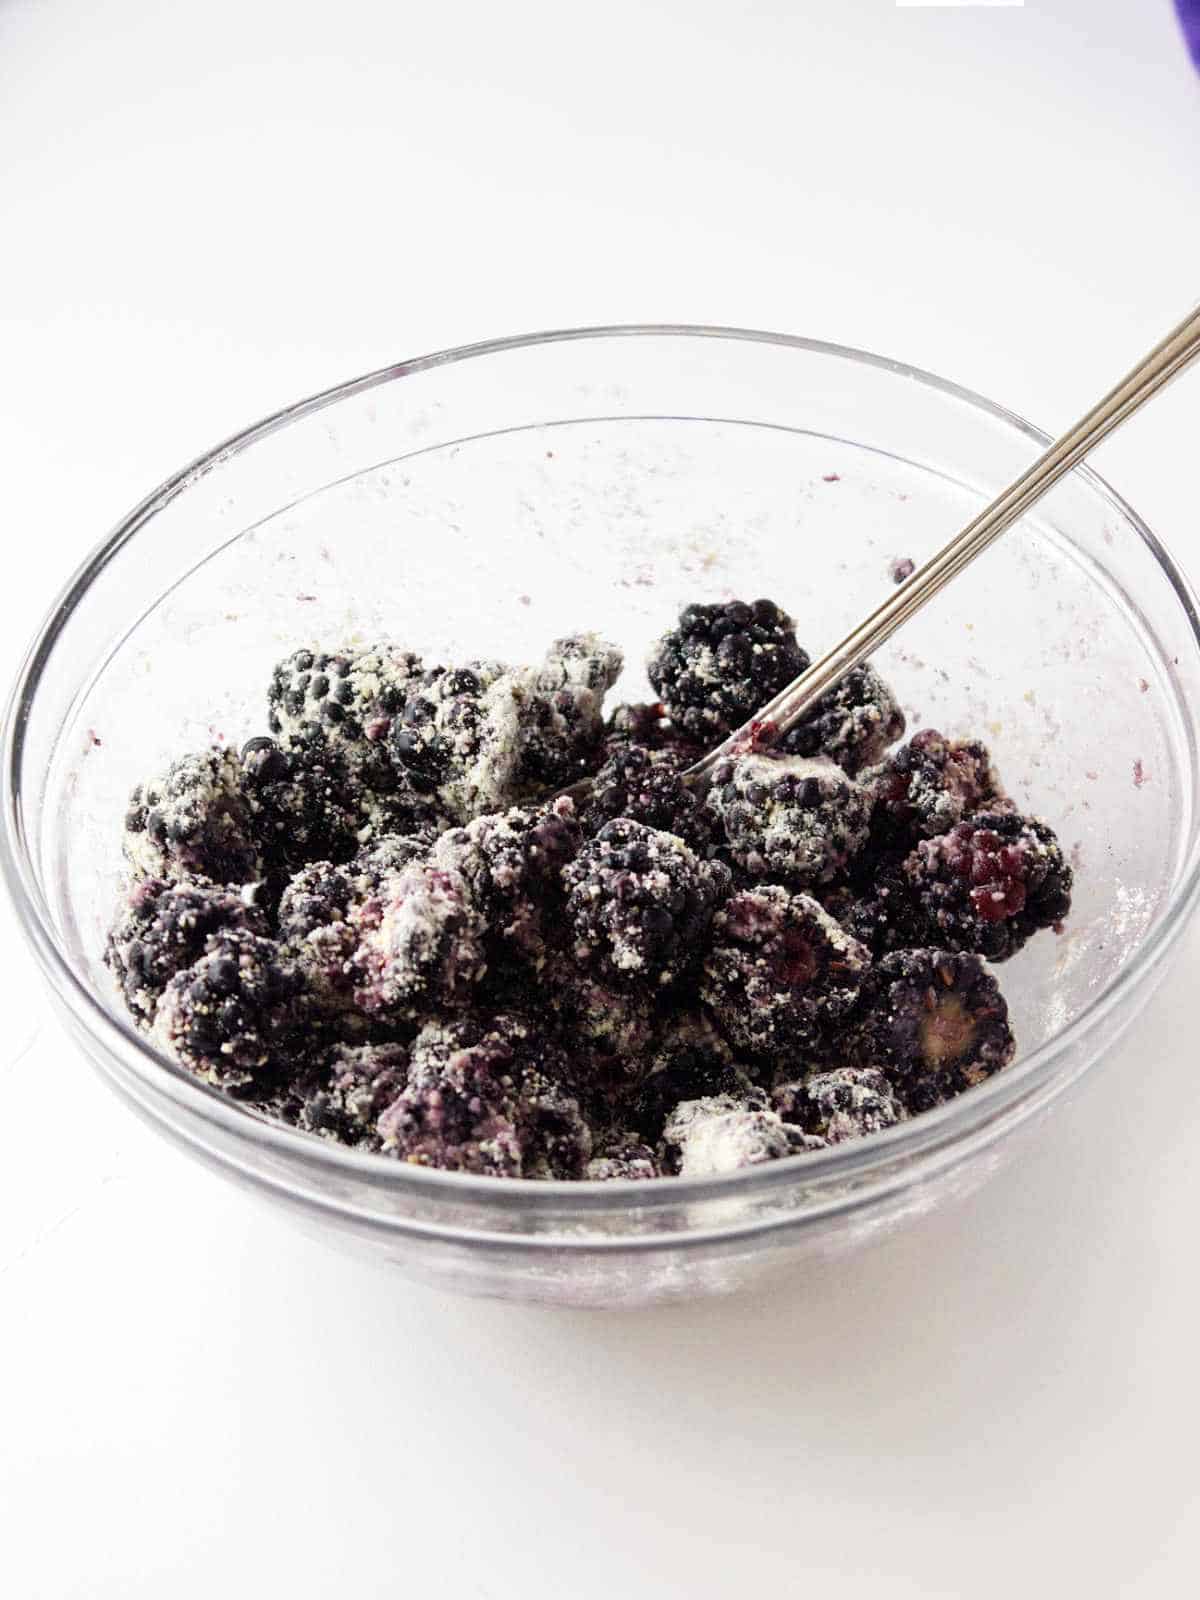 berries in a bowl tossed with flour.